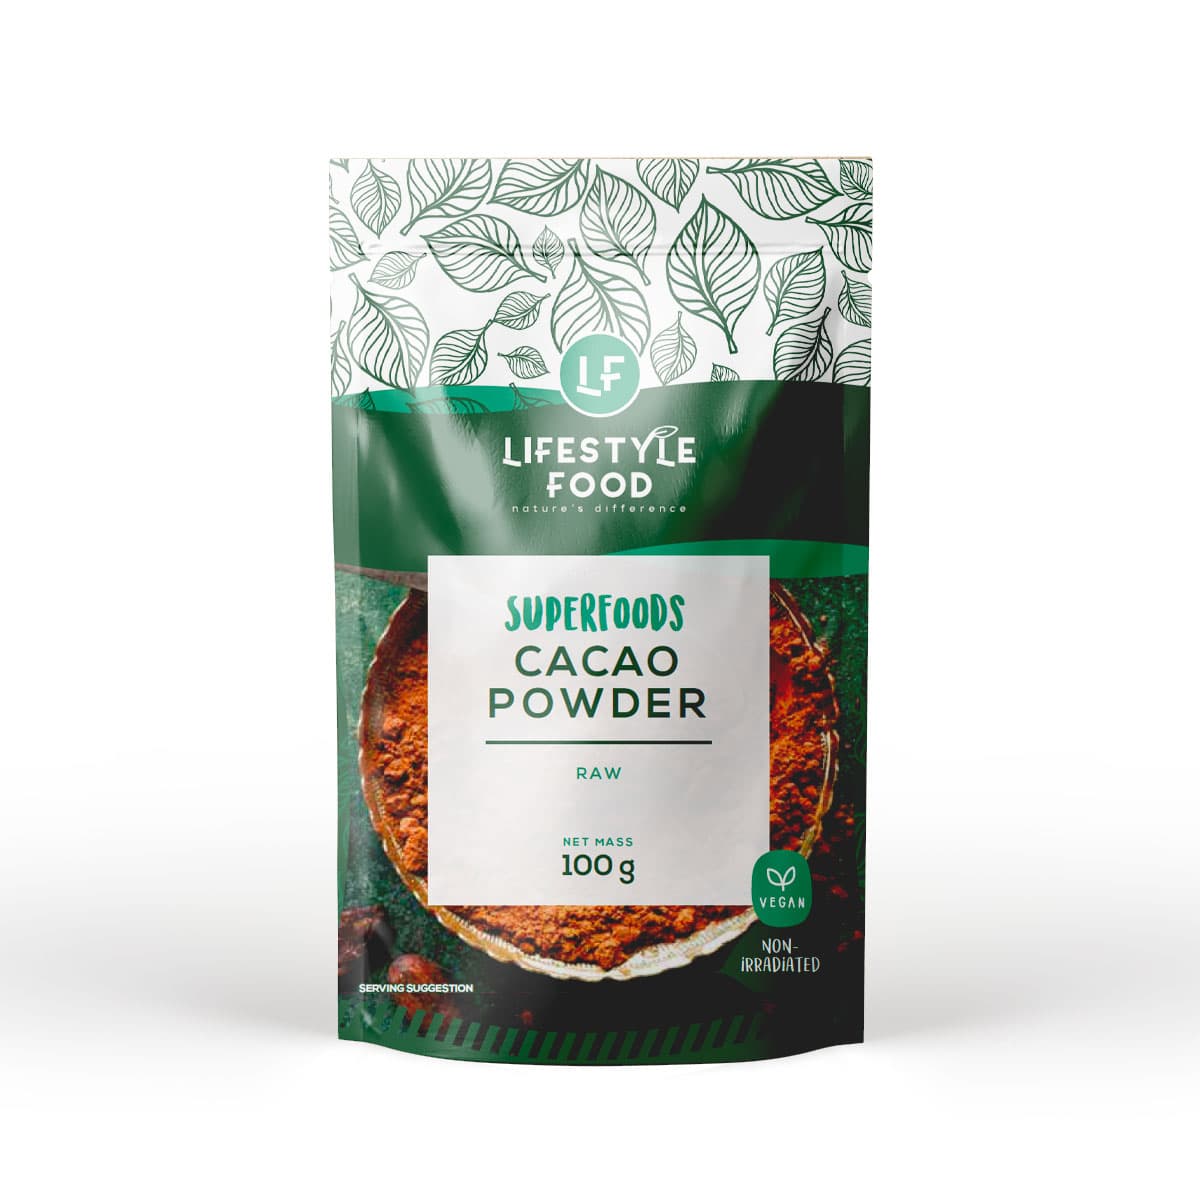 Lifestyle Food Superfoods Cacao Powder - 100g